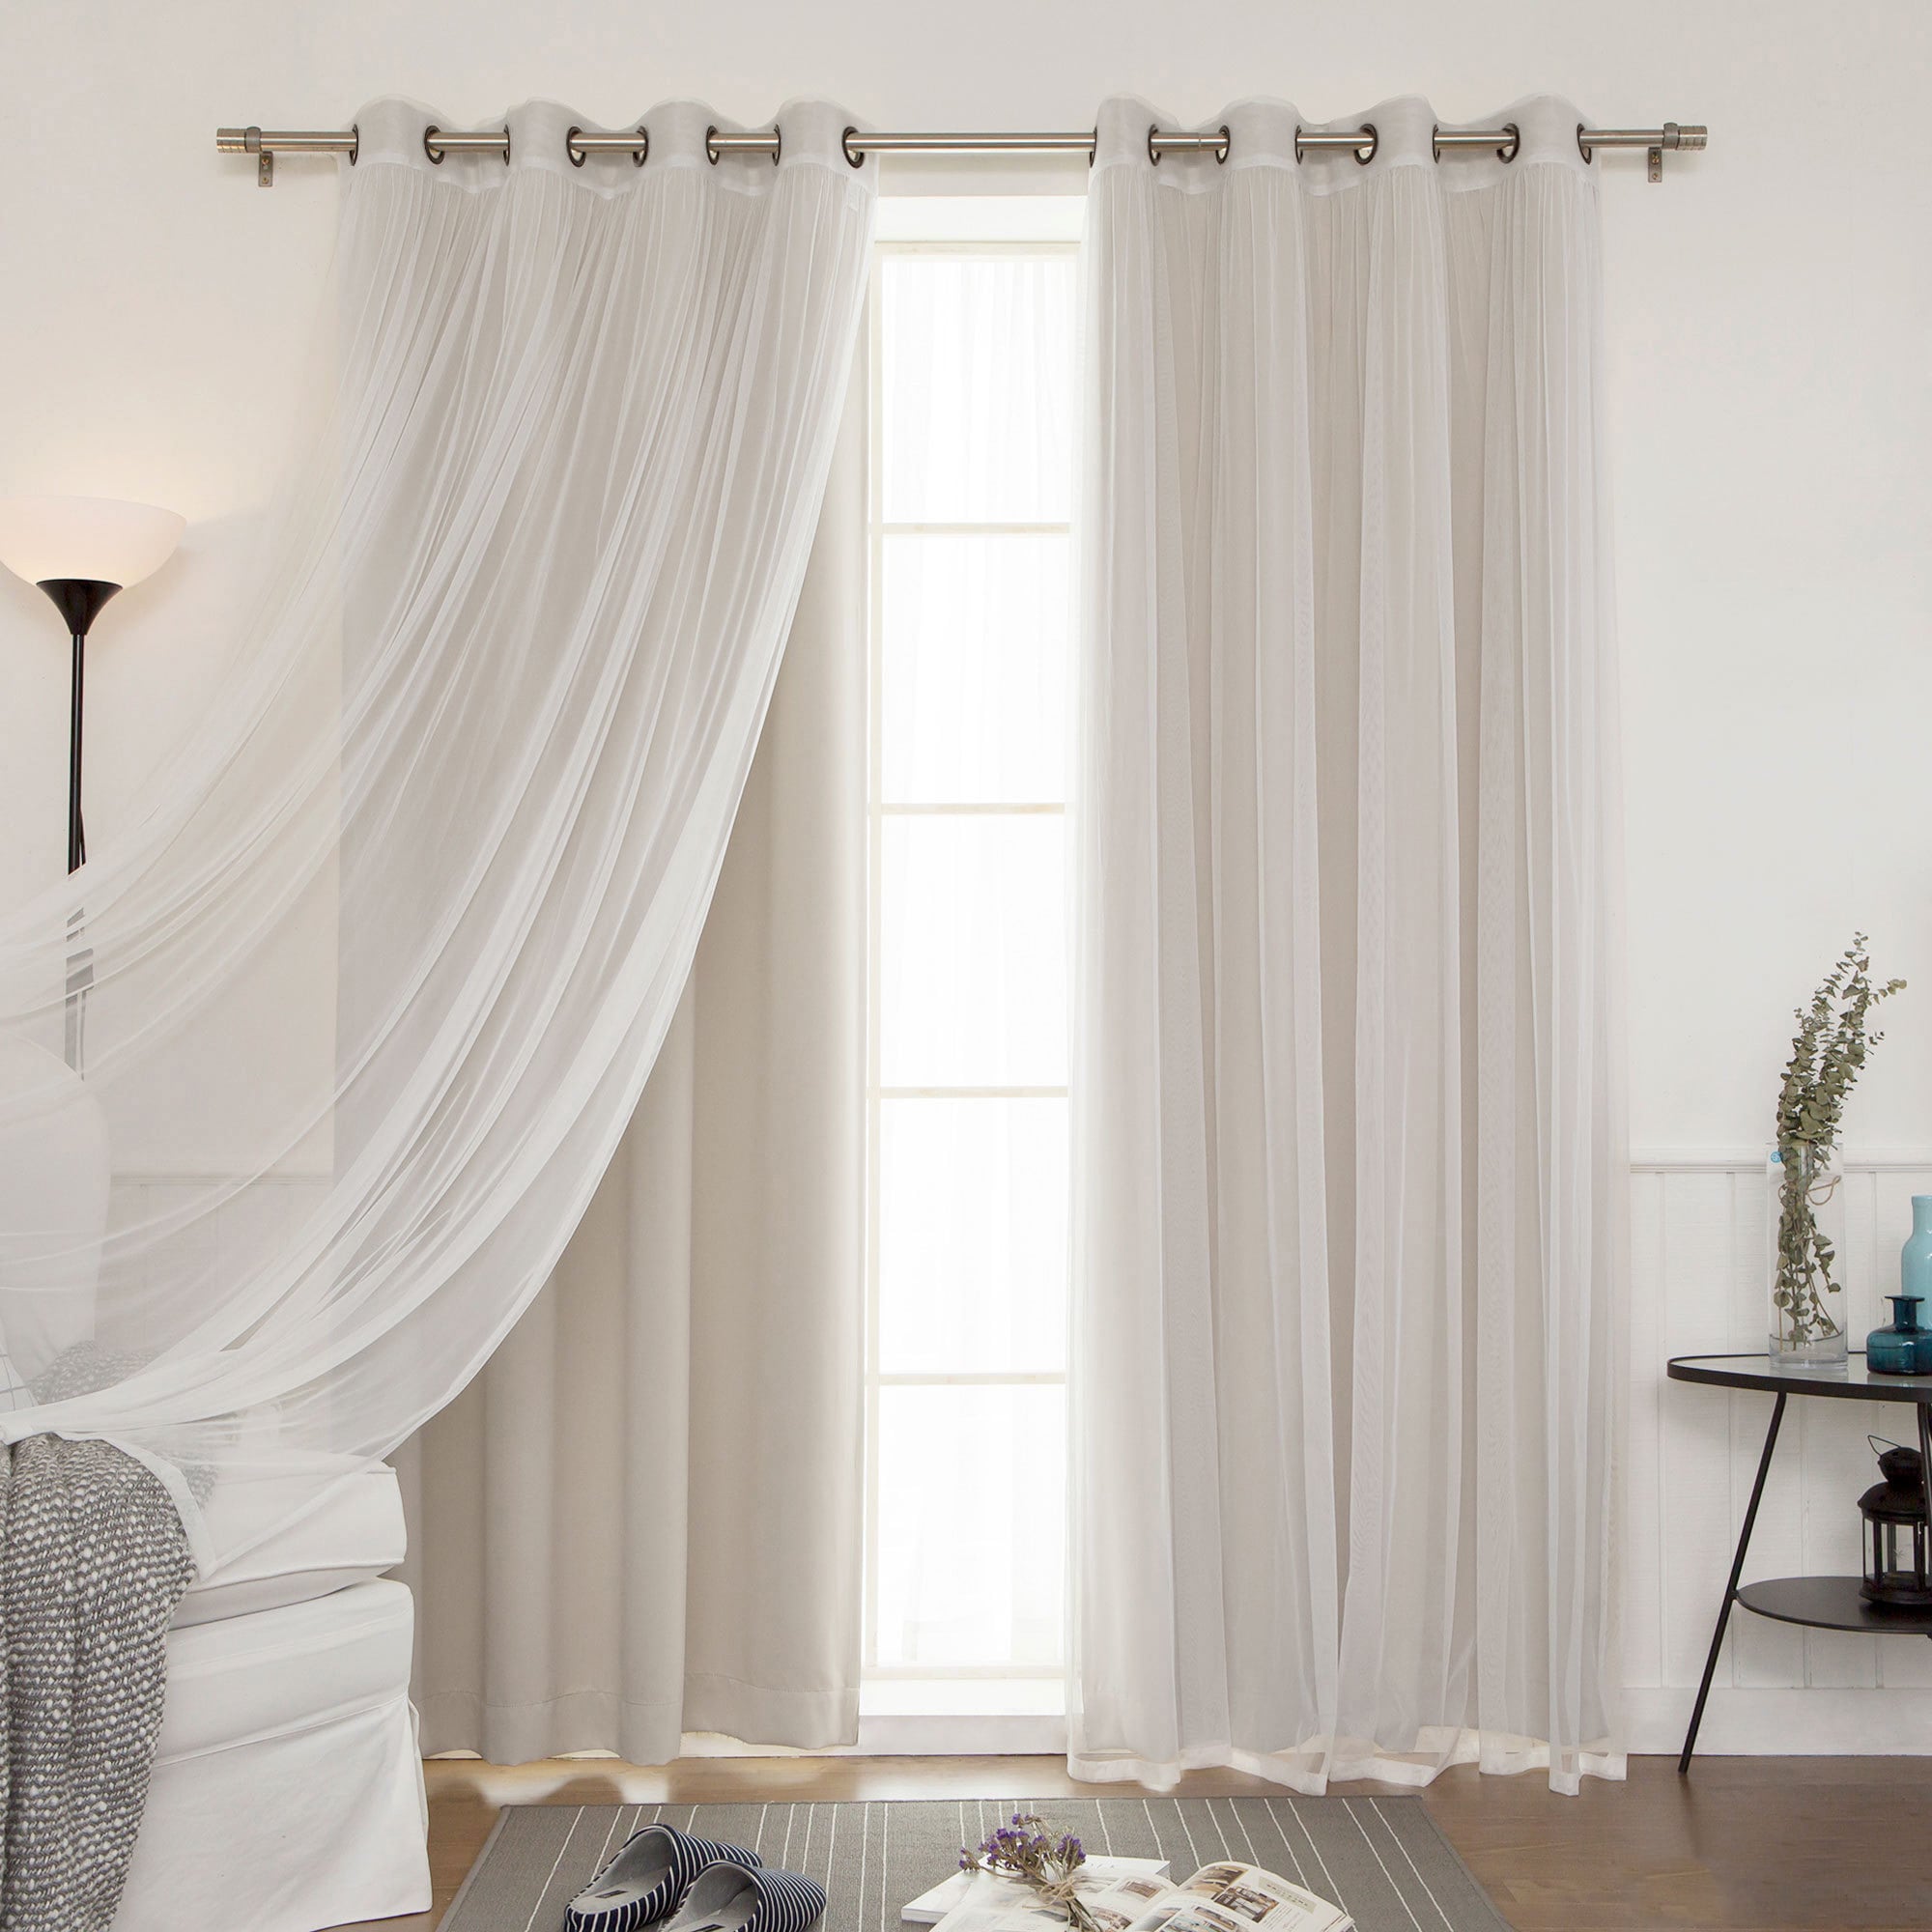 Aurora Home Mix and Match Curtains Blackout and Tulle Lace Sheer Curtain  Panel Set (4-piece) - On Sale - Overstock - 11816183